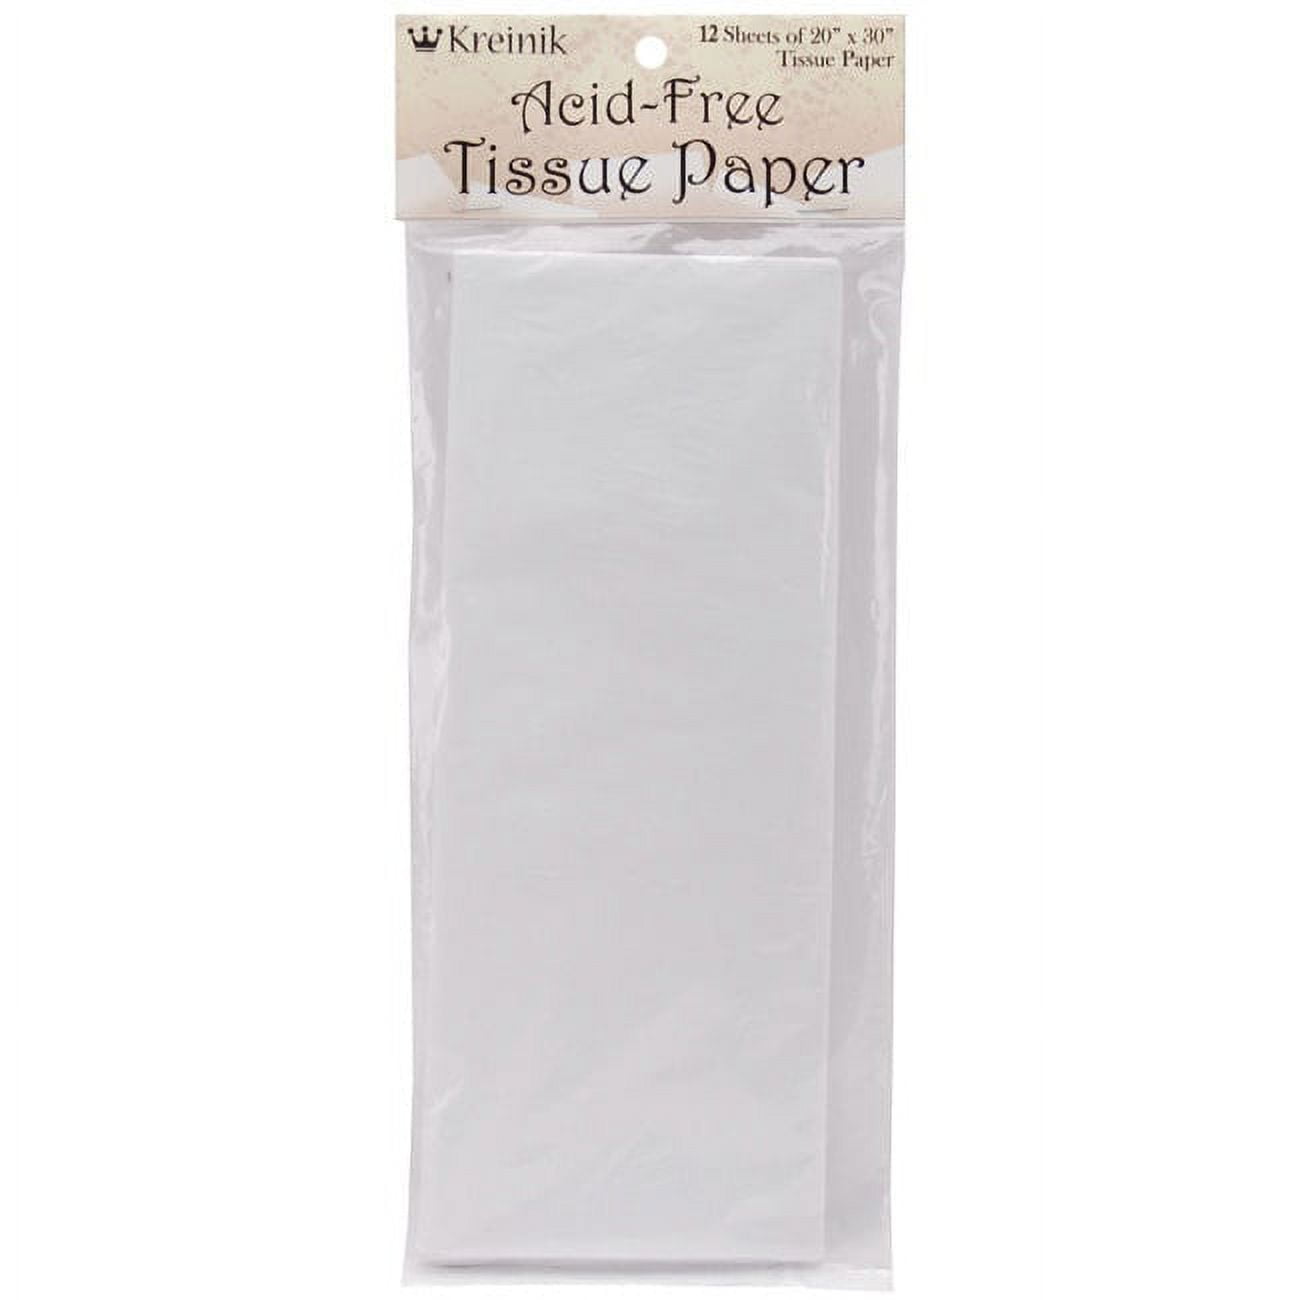 30 Sheets of Acid Free 35cm x 45cm Tissue Paper - 18gsm Wrapping Paper